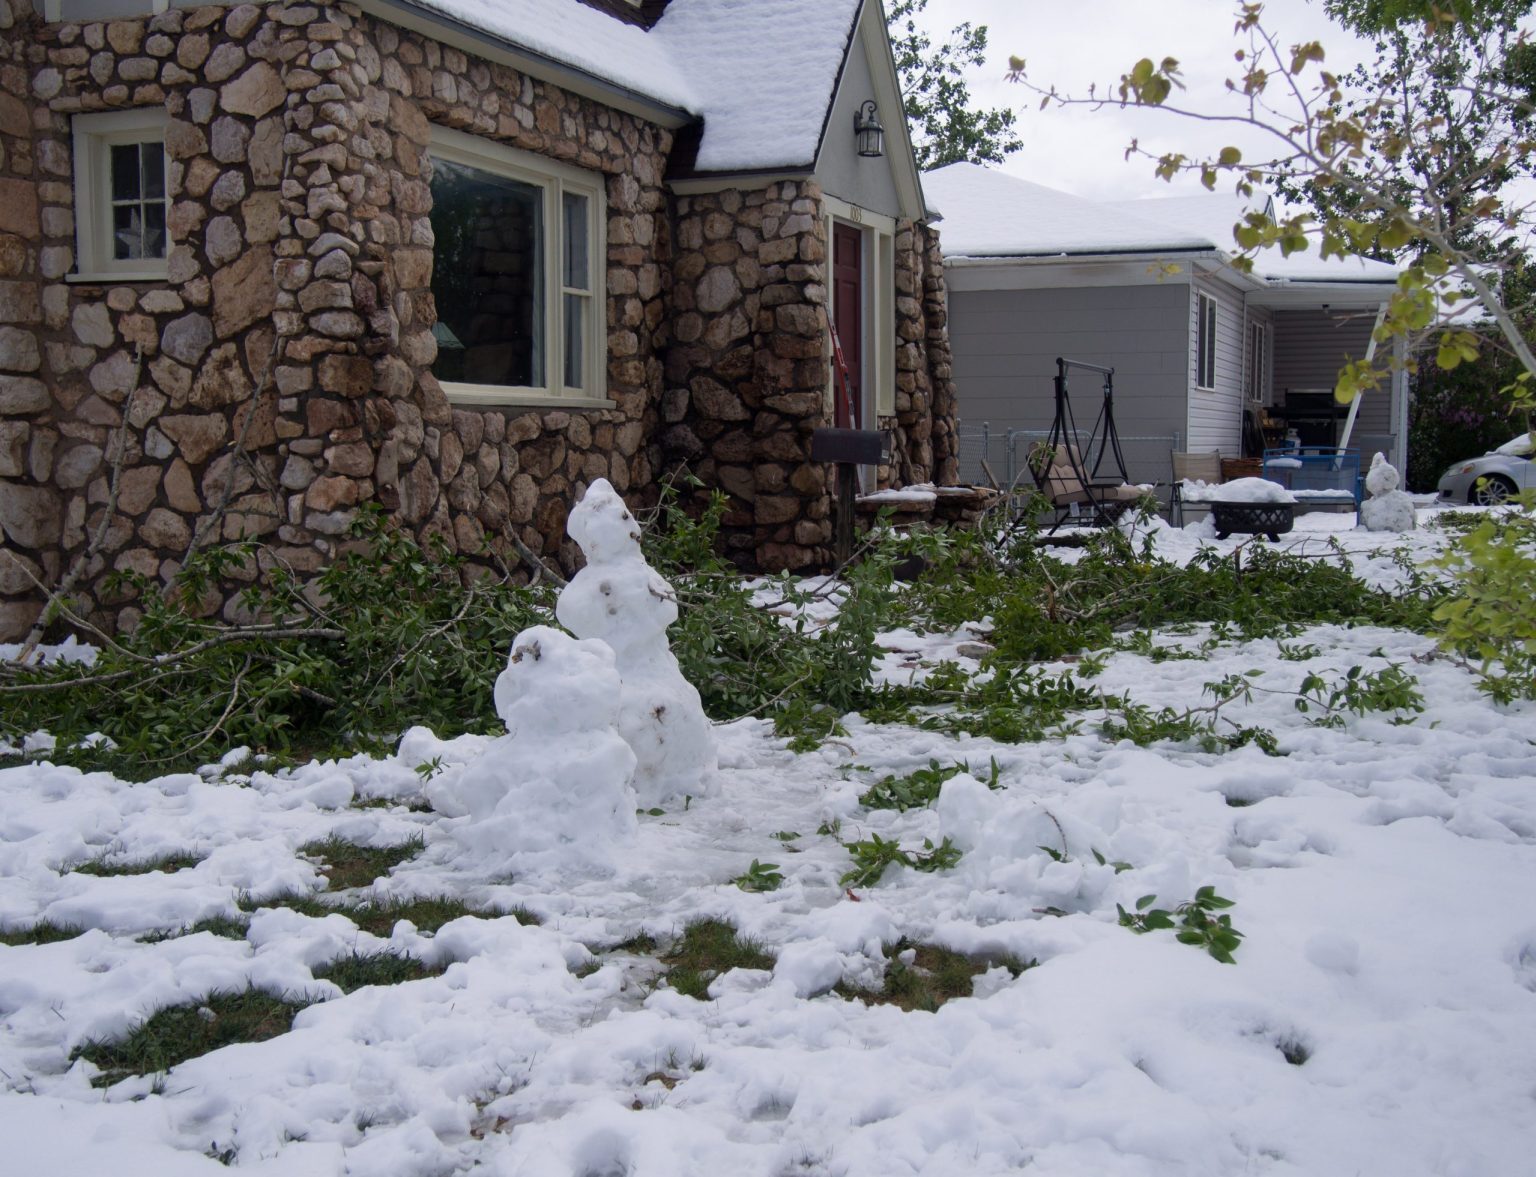 Two snowmen were built in the front yard of a home on Harney Street, using snow from a surprise snowstorm that occurred Monday in Laramie, WY.